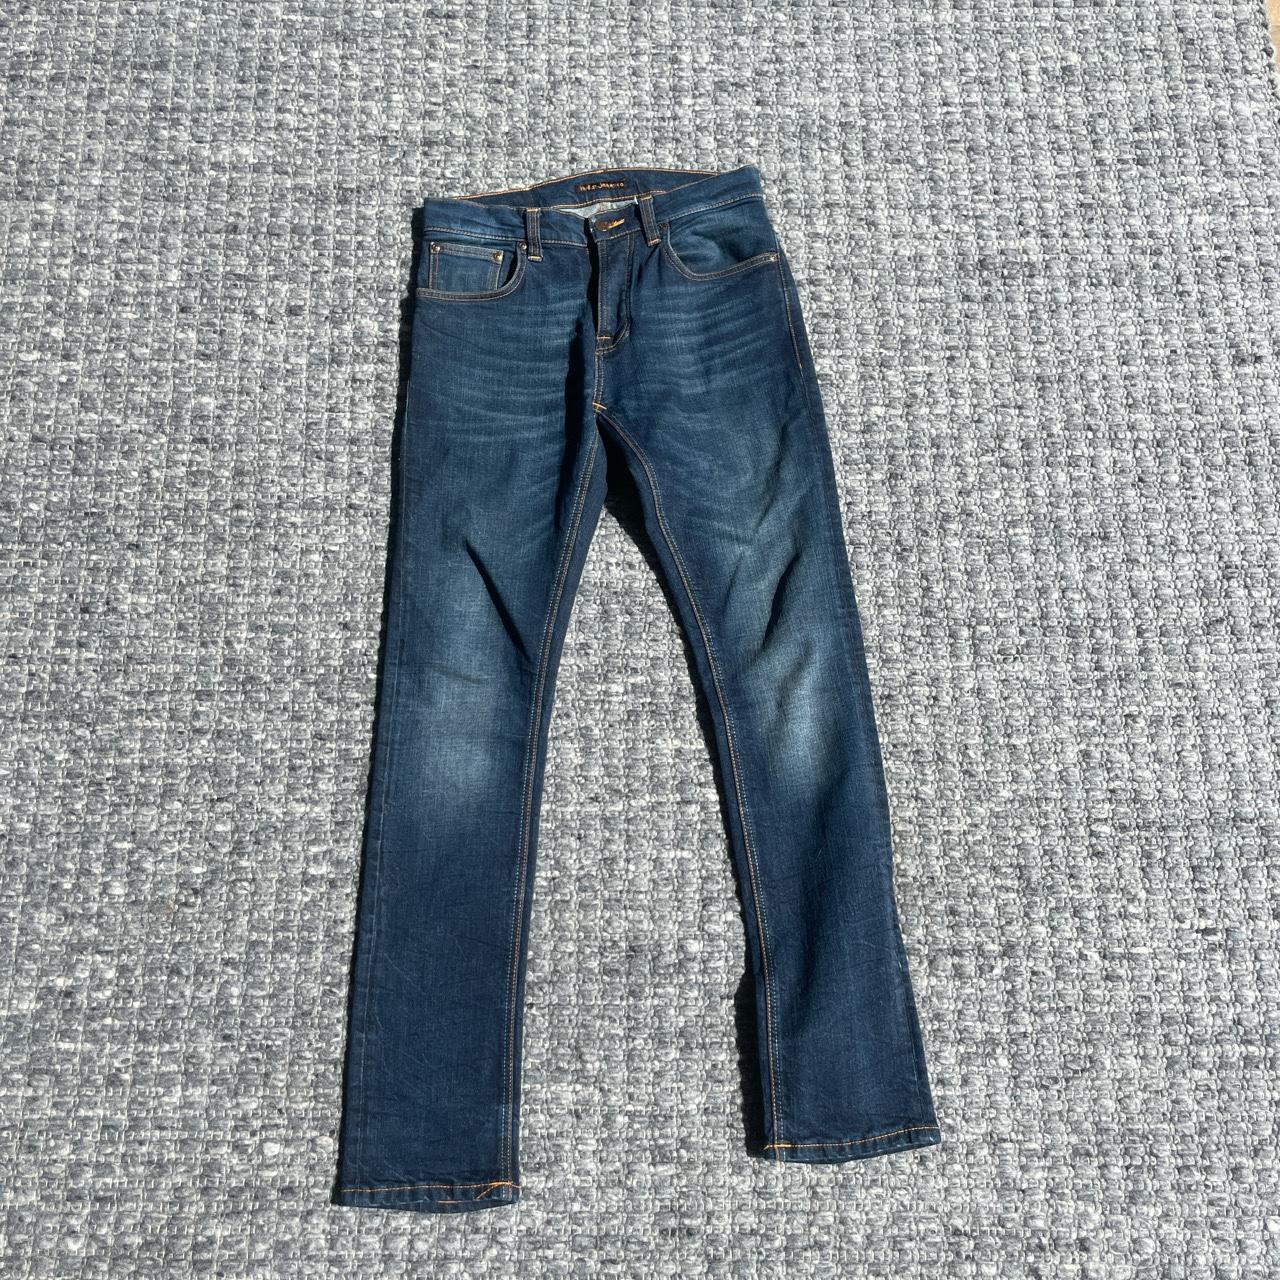 Very well conditioned Nudie Jeans. Only worn once... - Depop